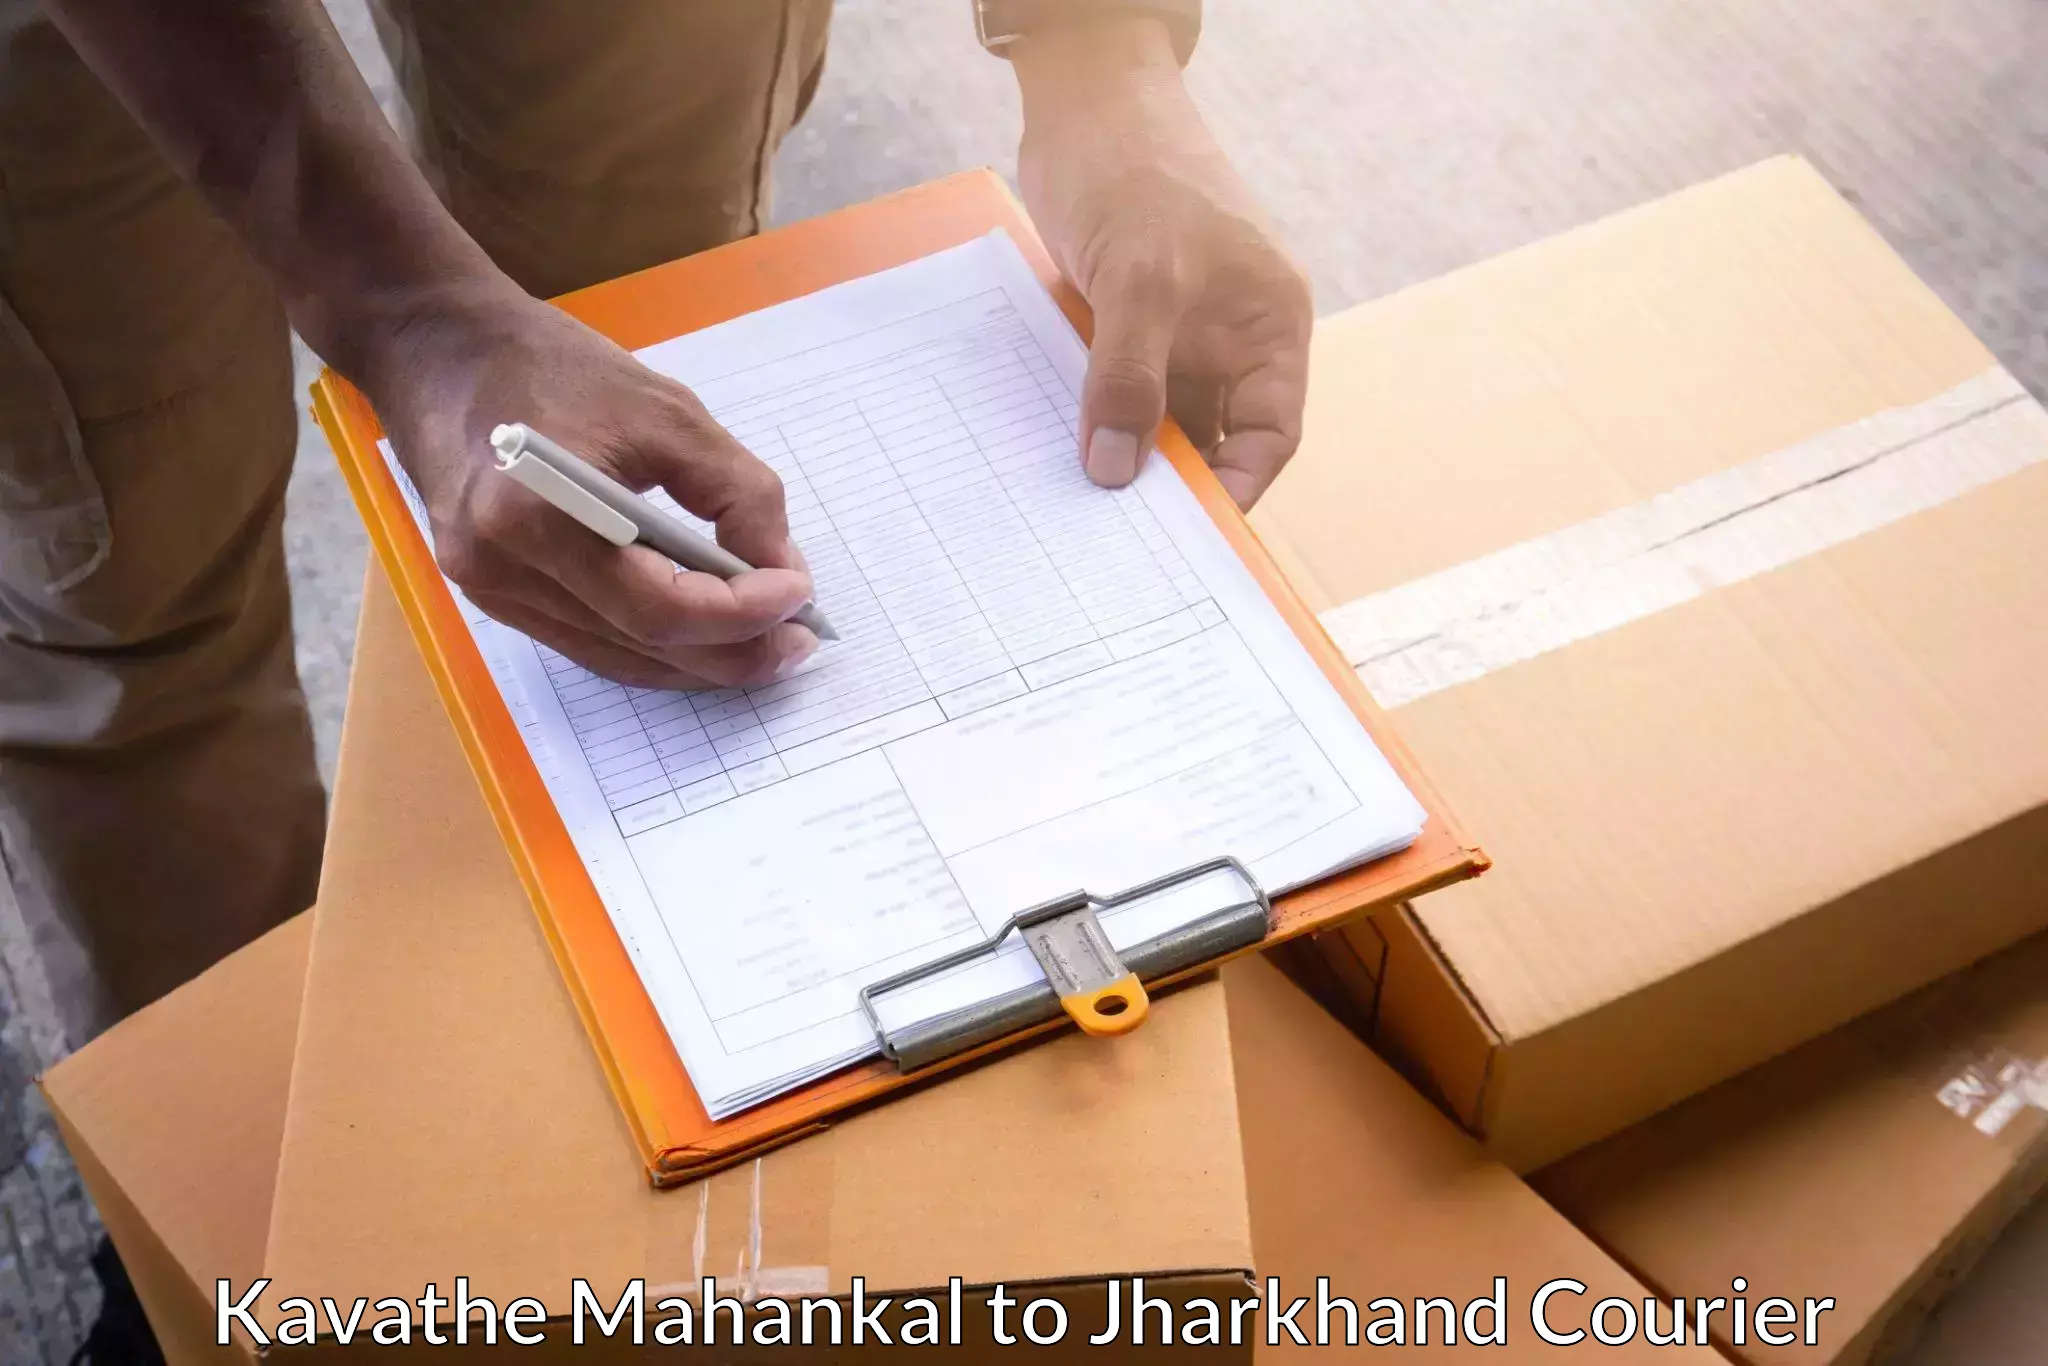 Emergency parcel delivery Kavathe Mahankal to Chaibasa